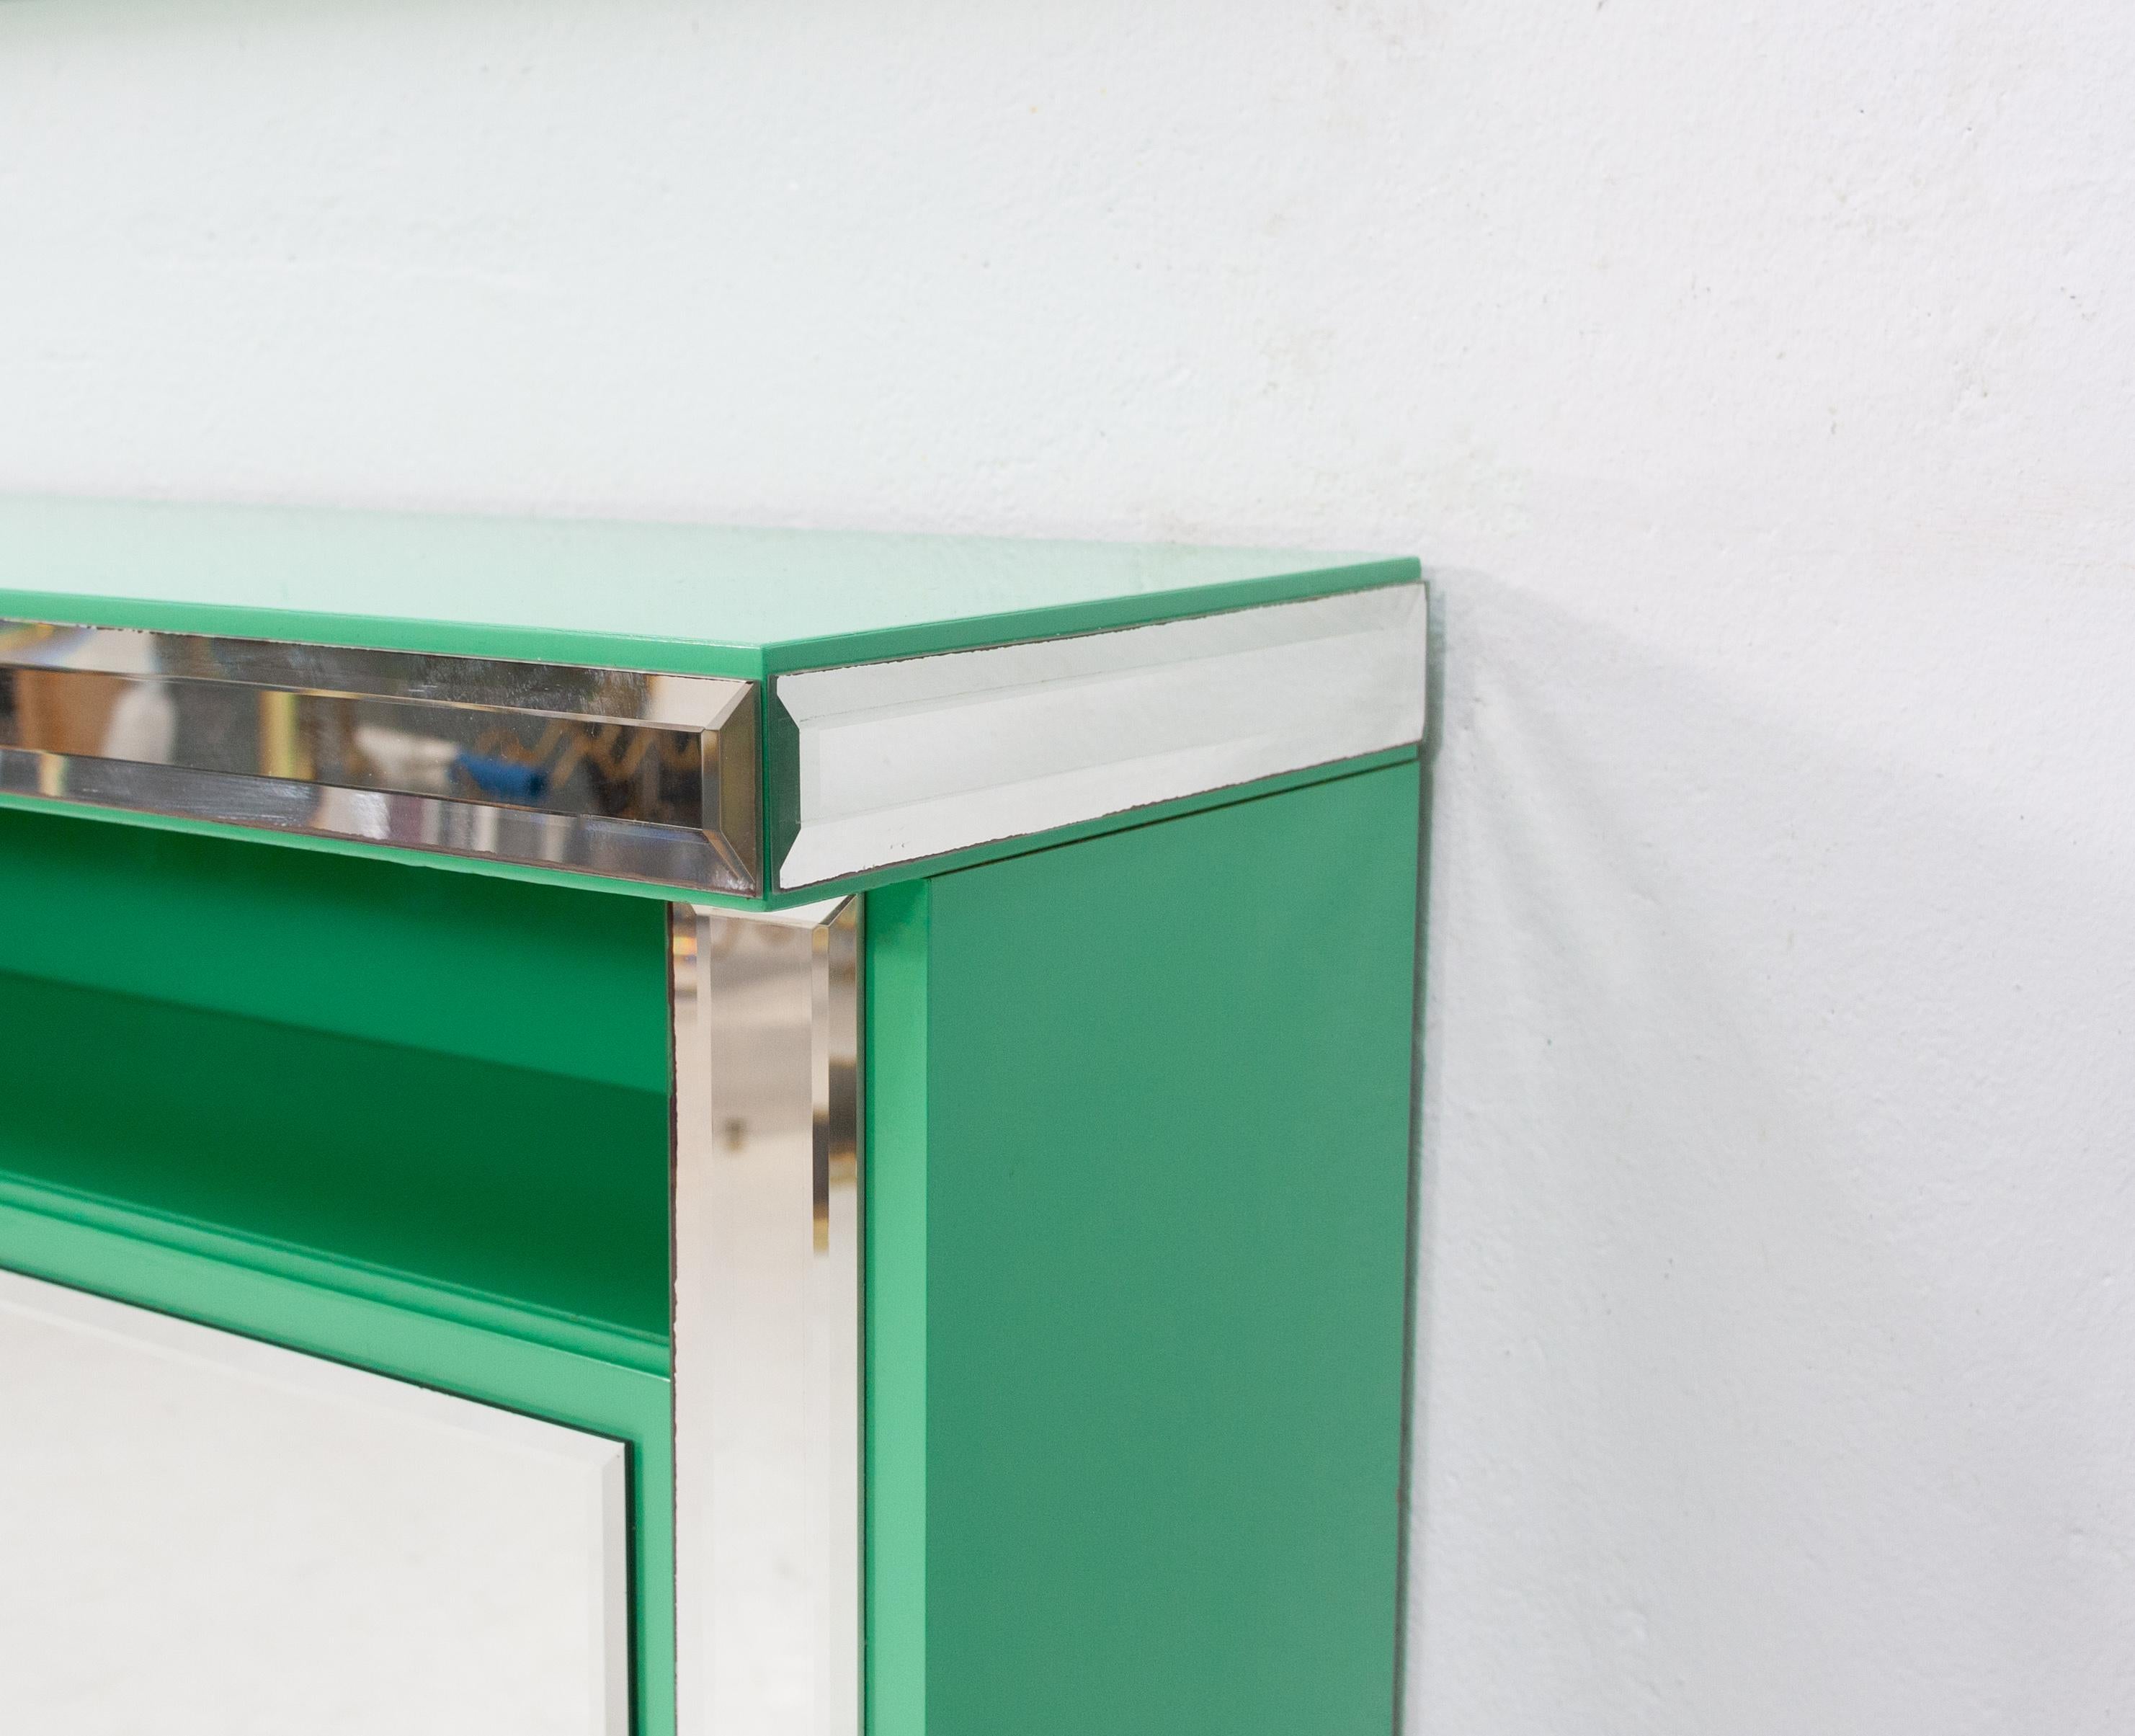 Mint green console mirror. The color of this piece is spectacular, love it. Original set 
By Schöninger 1970s, cut glass mirror. Some useful storage in the console table. Still in very good condition after all these years .
Measurements console